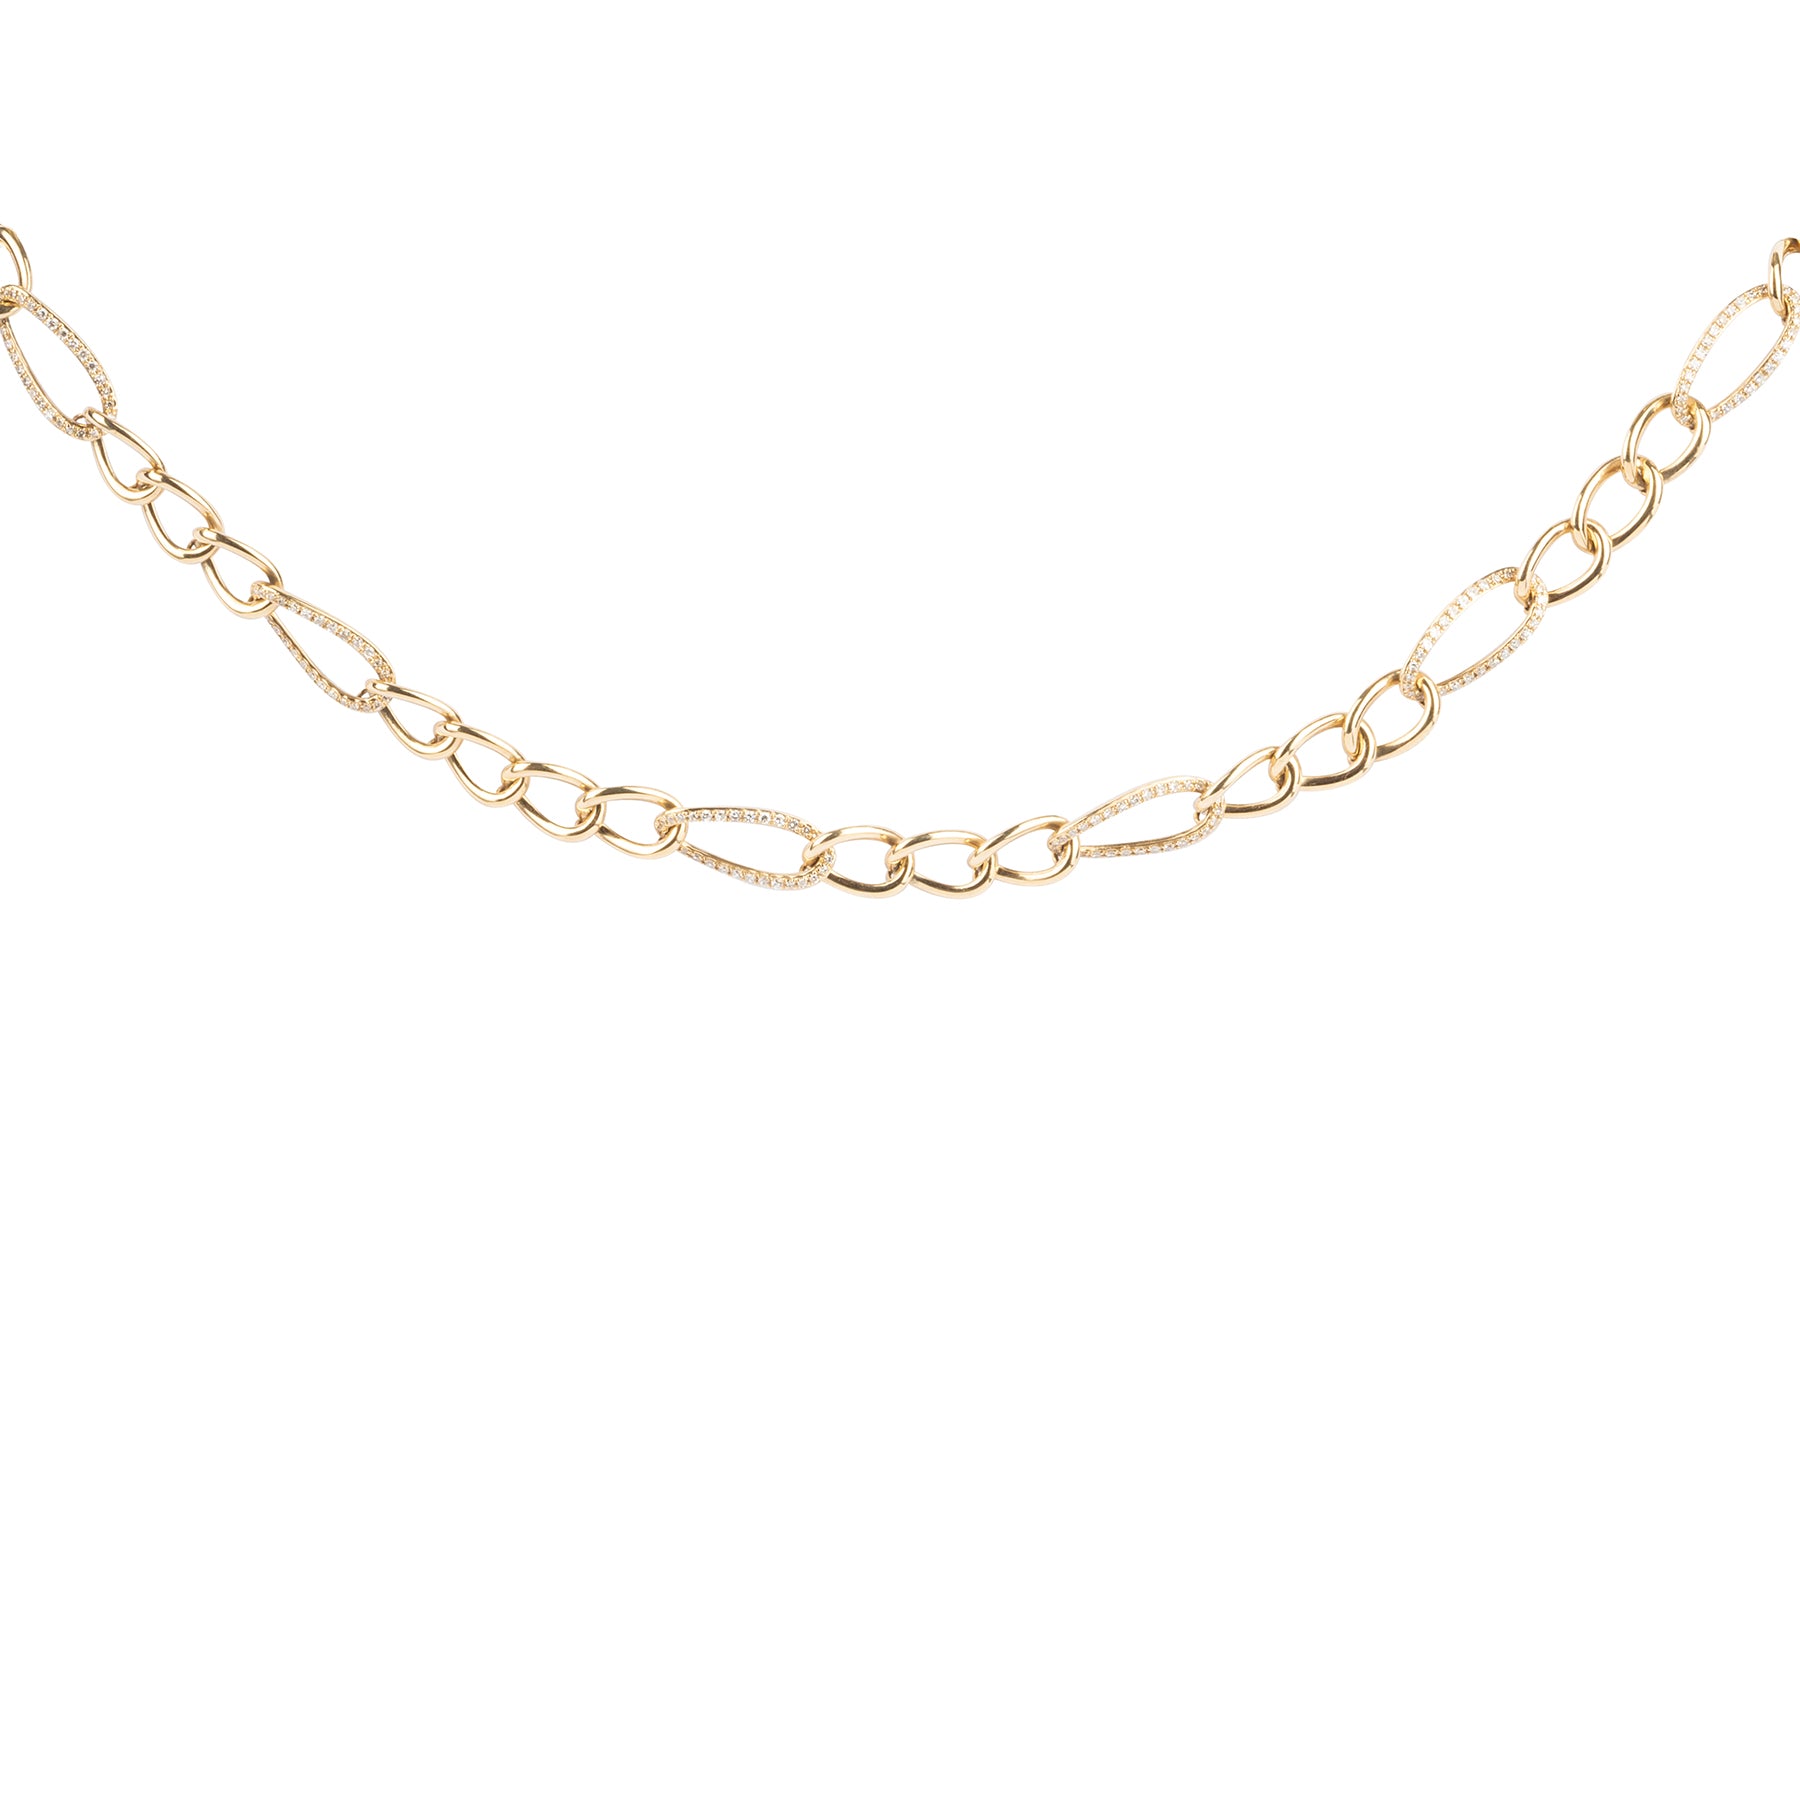 Open Chain Link Necklace With Diamonds - Nina Segal Jewelry